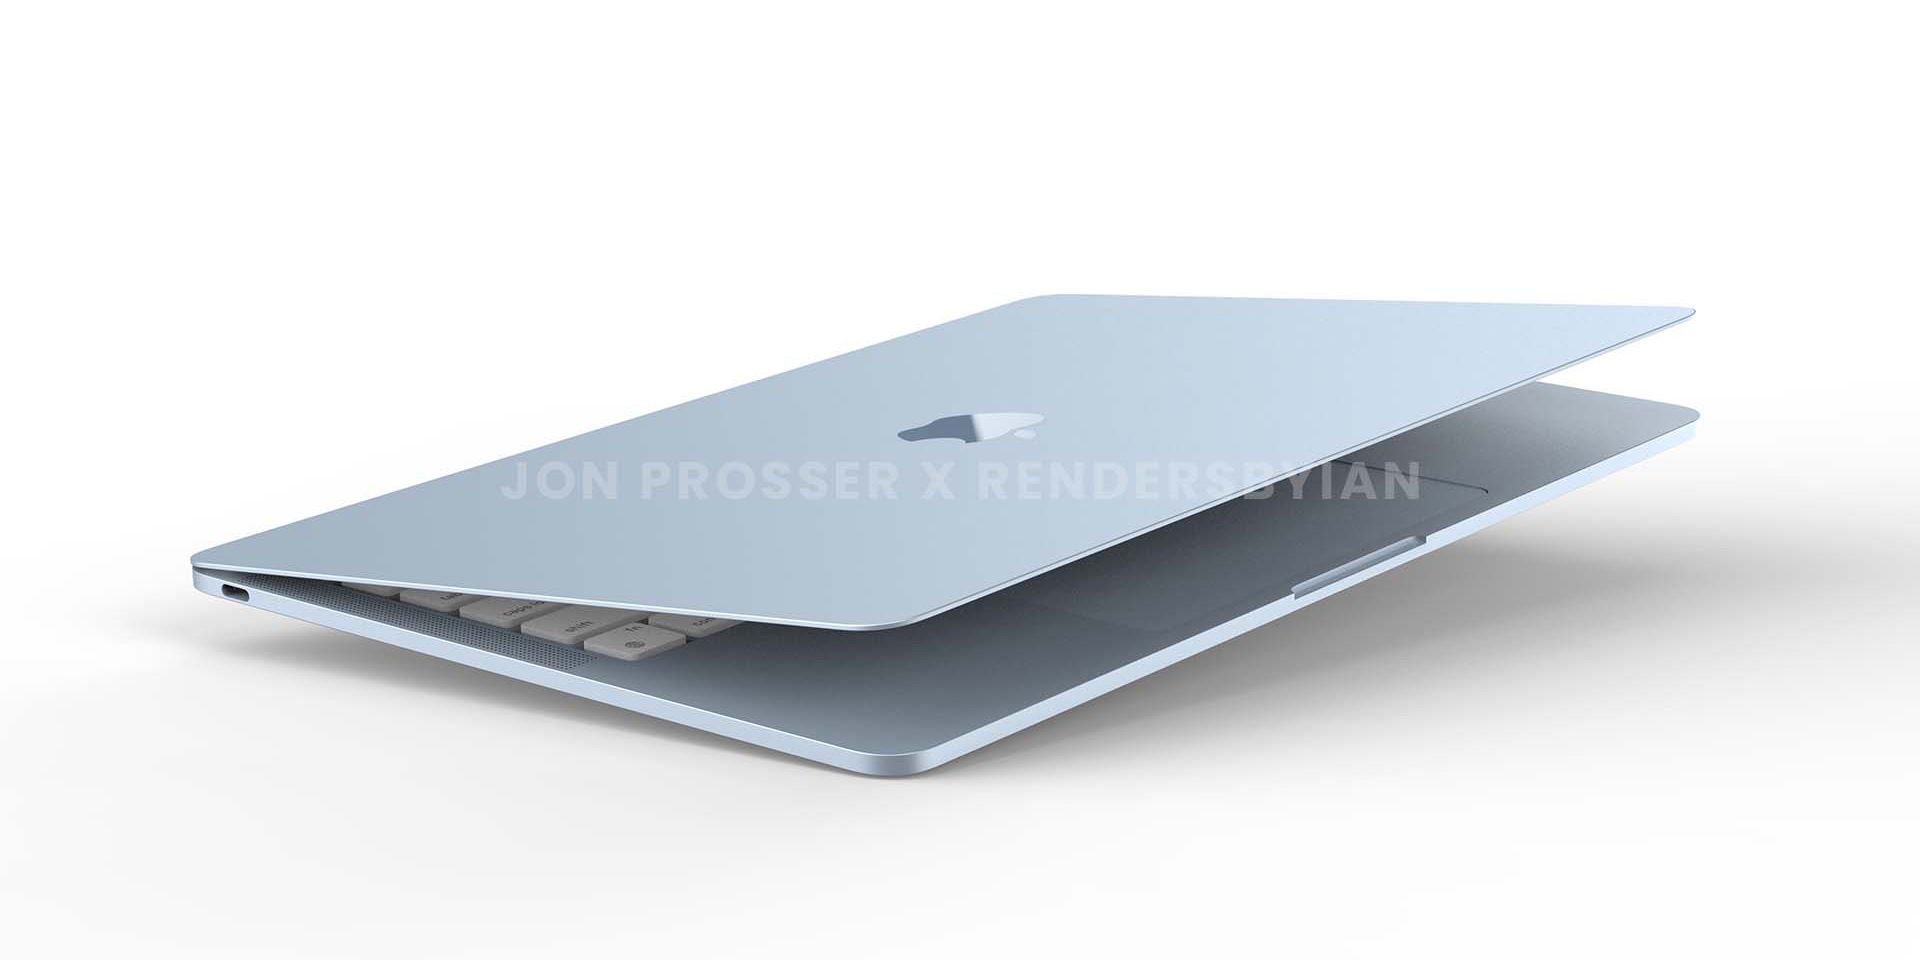 M2 MacBook Air Colors & Changes: What The Leaks Say You Should Expect